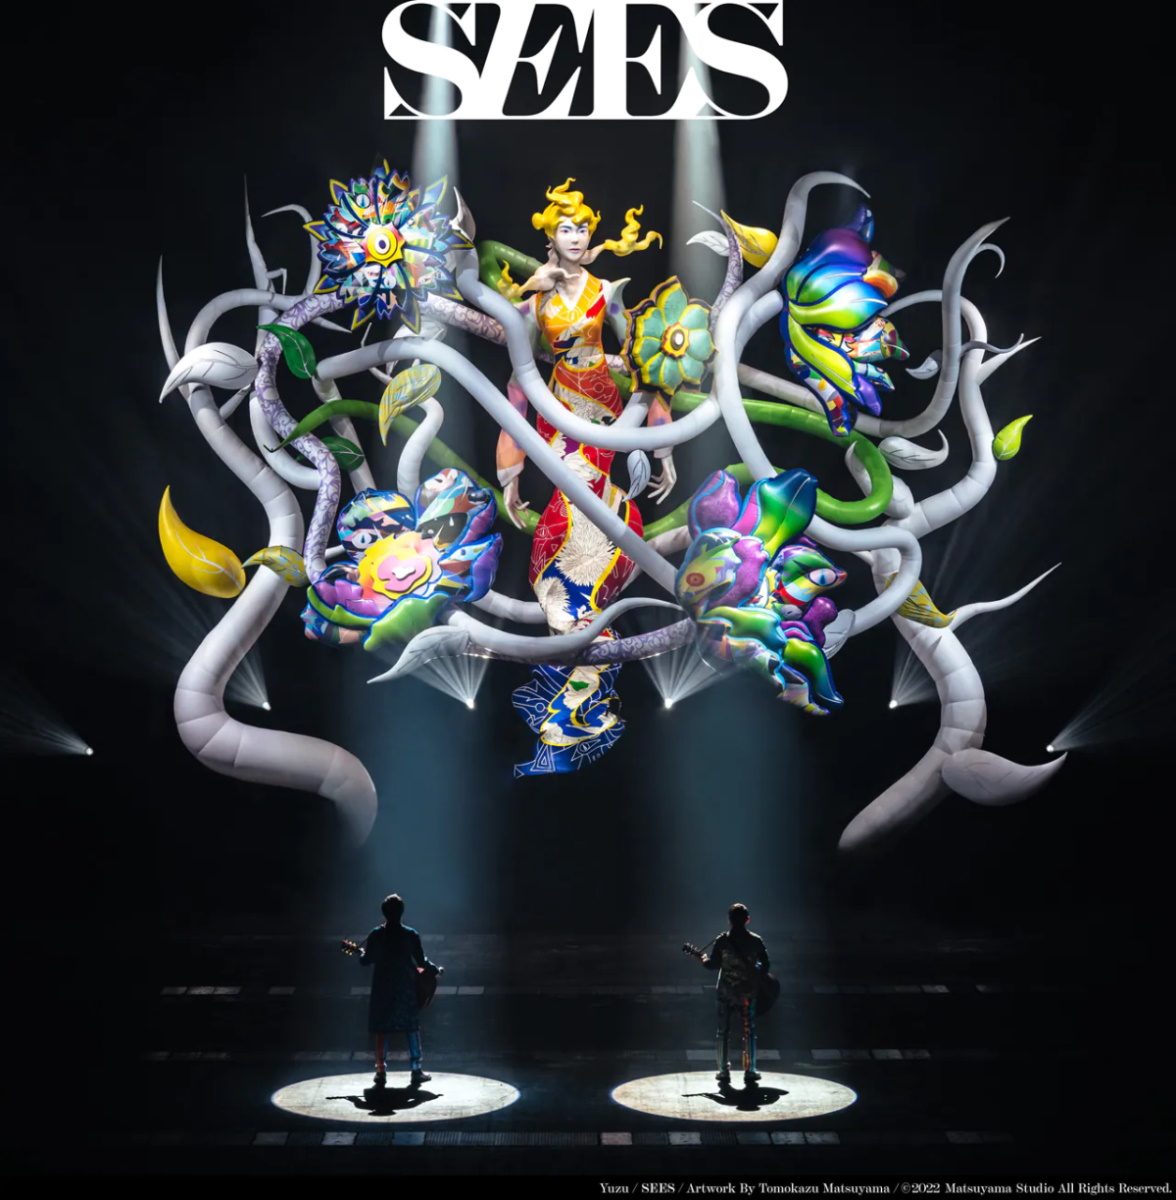 Cover for『YUZU - Yume Maboroshi』from the release『SEES』